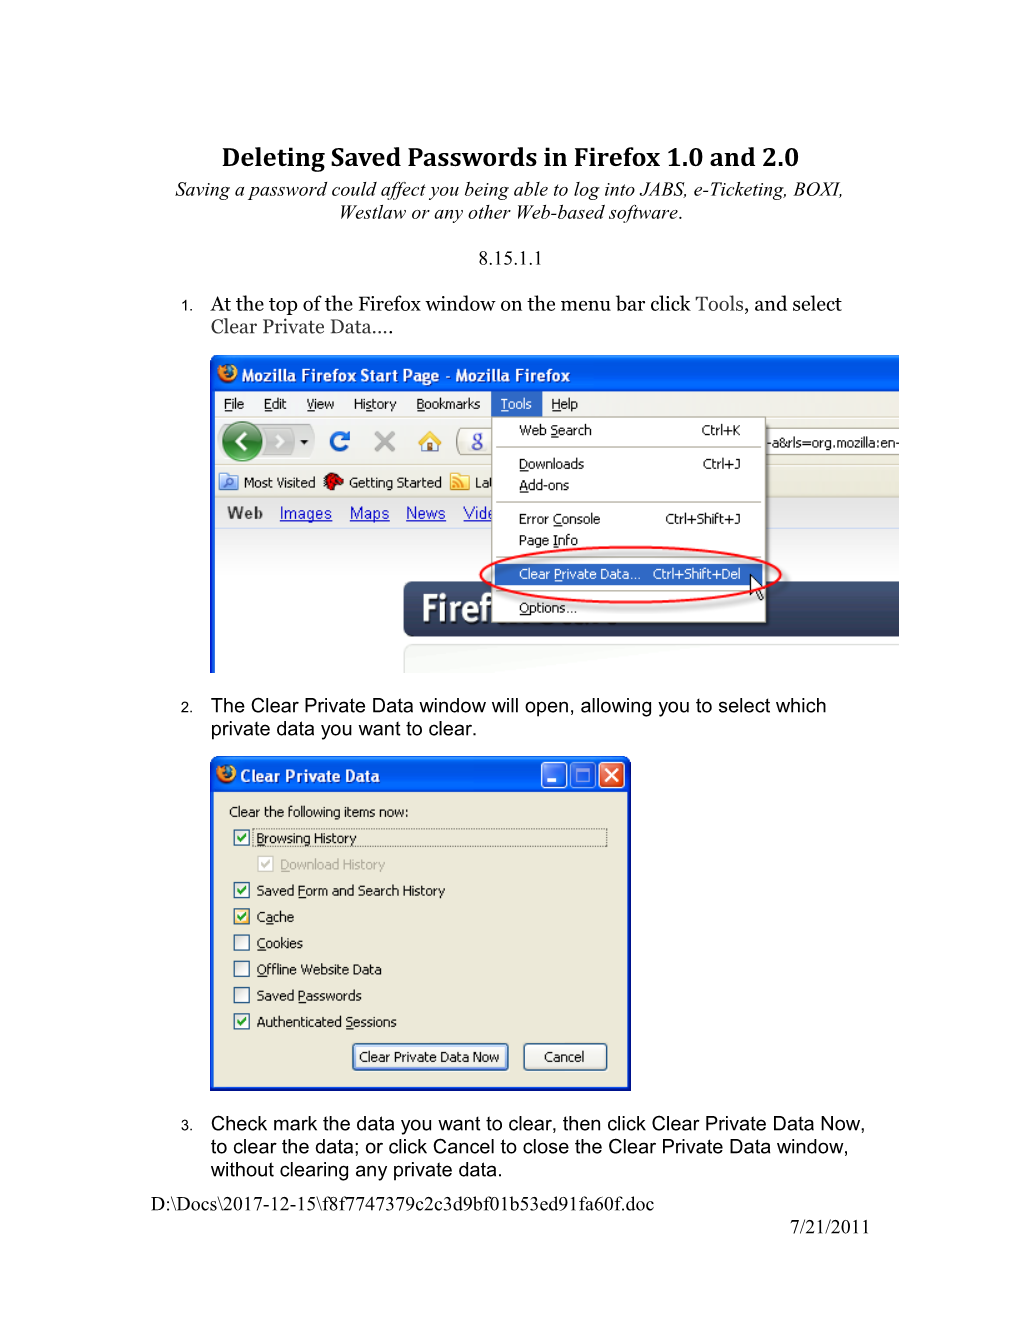 Deleting Saved Passwords in Firefox 1.0 and 2.0